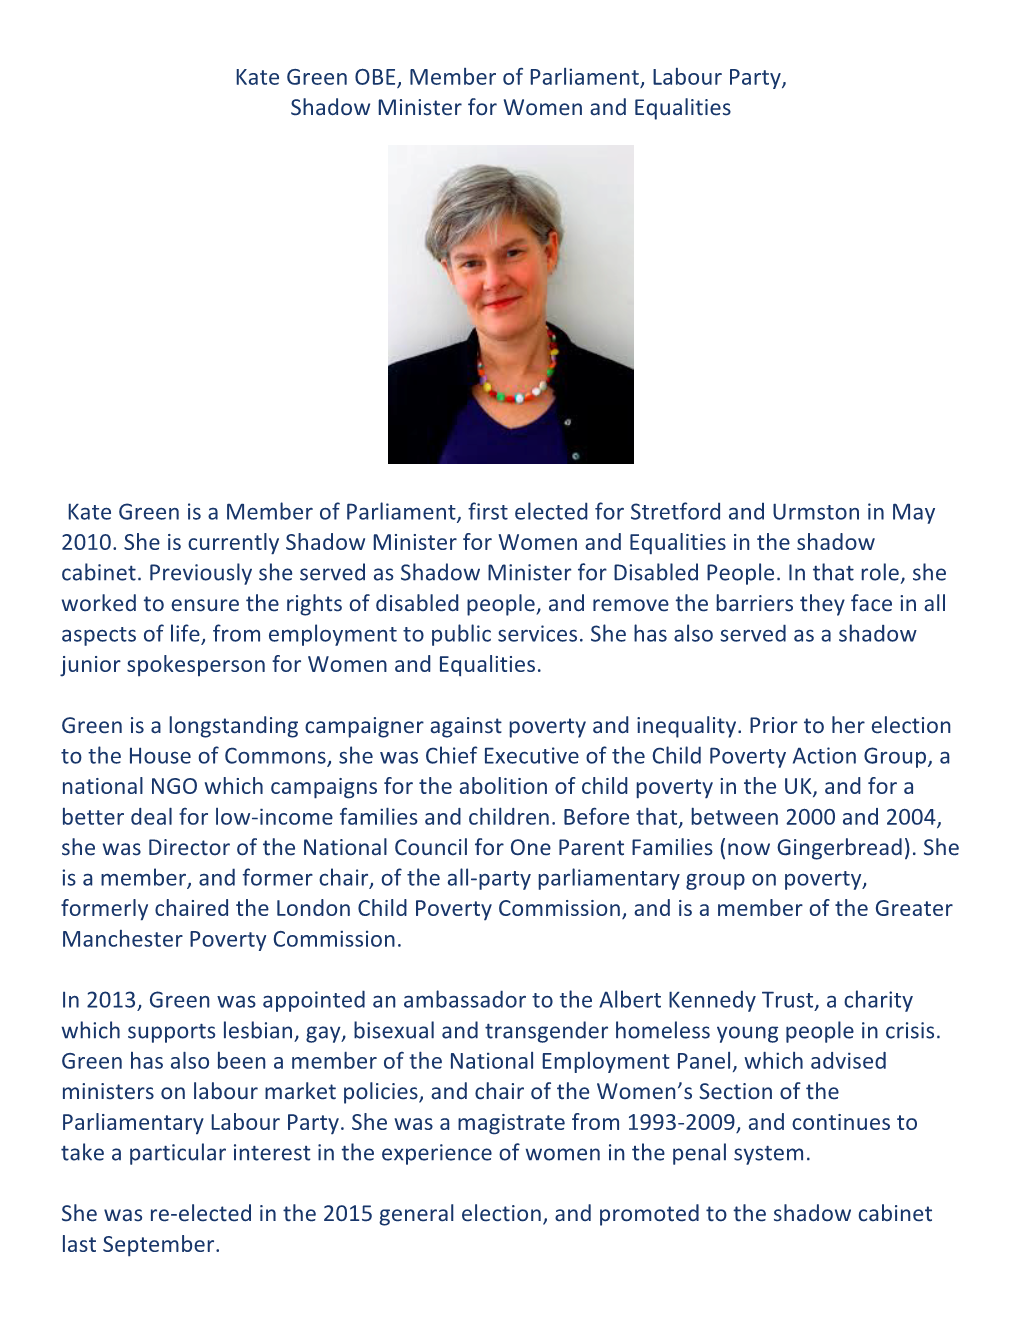 Kate Green OBE, Member of Parliament, Labour Party, Shadow Minister for Women and Equalities